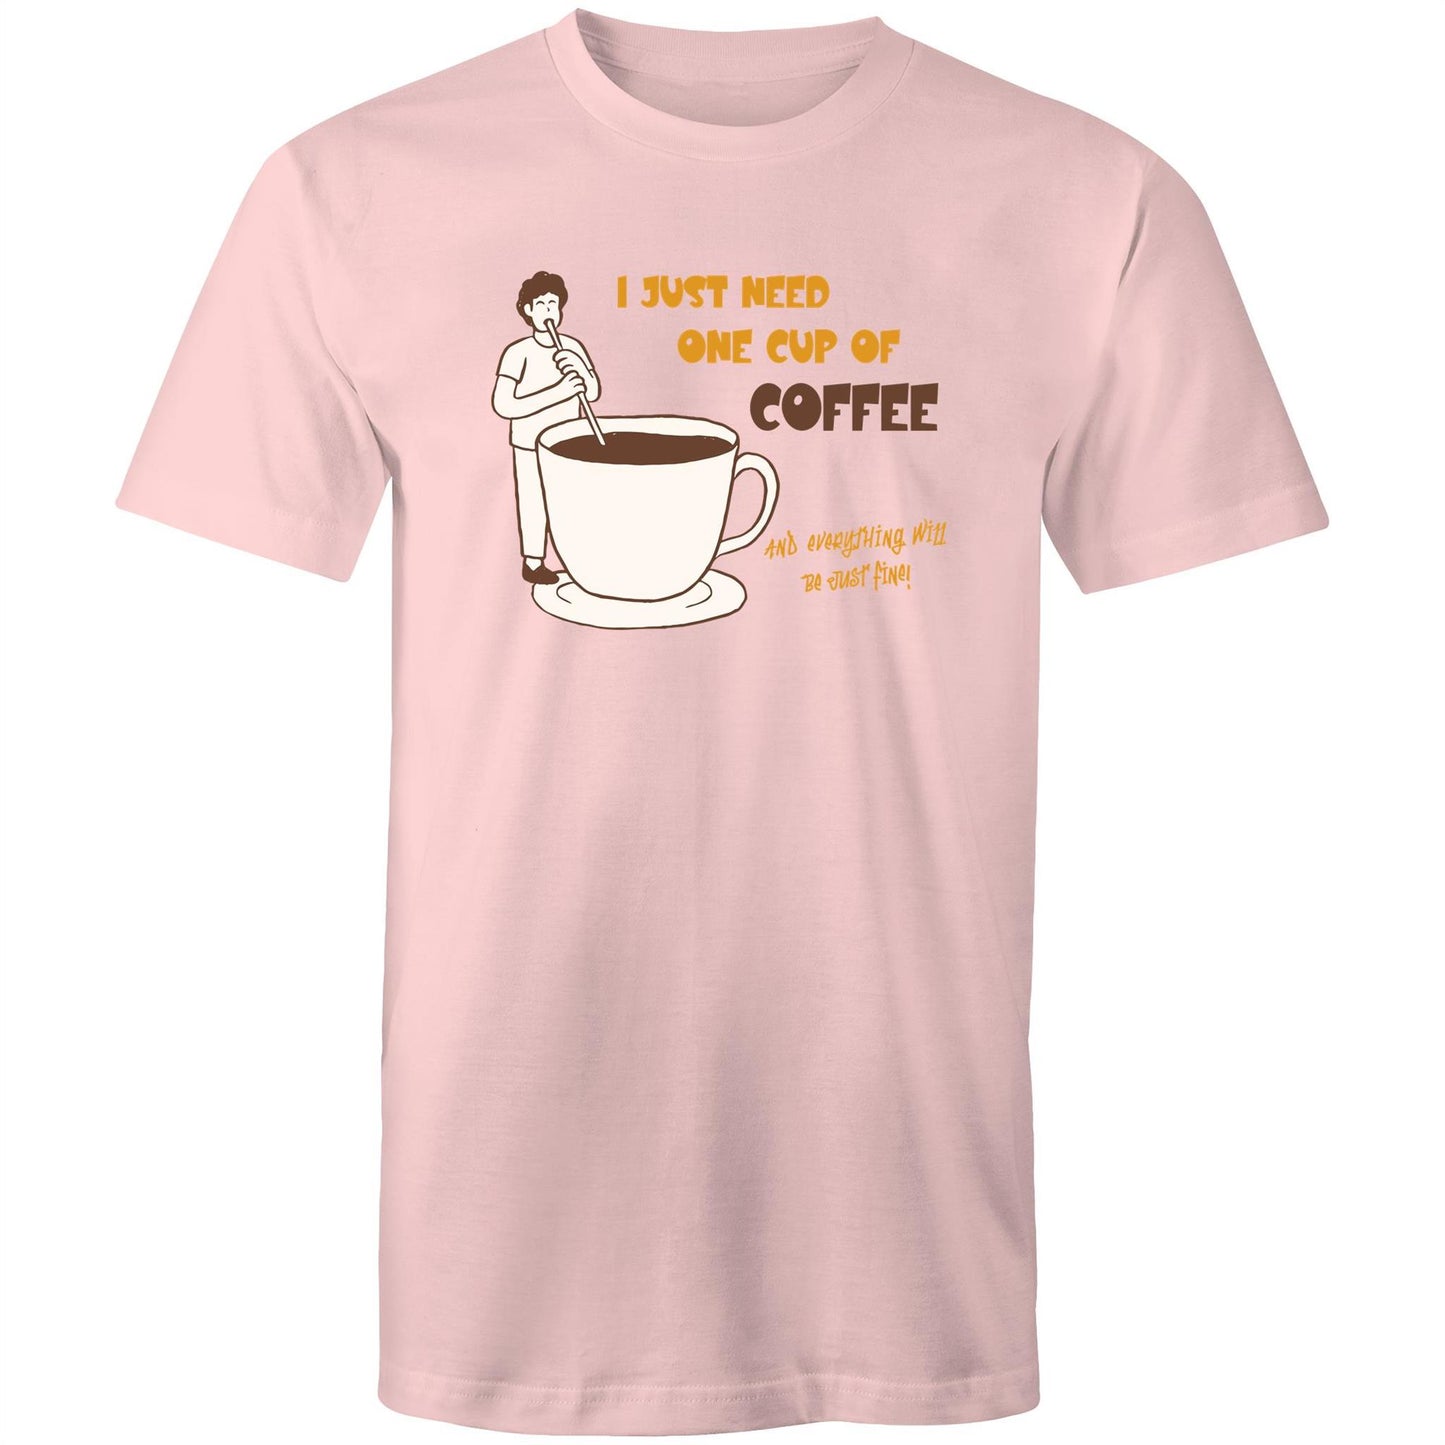 I Just Need One Cup Of Coffee And Everything Will Be Just Fine - Mens T-Shirt Pink Mens T-shirt Coffee